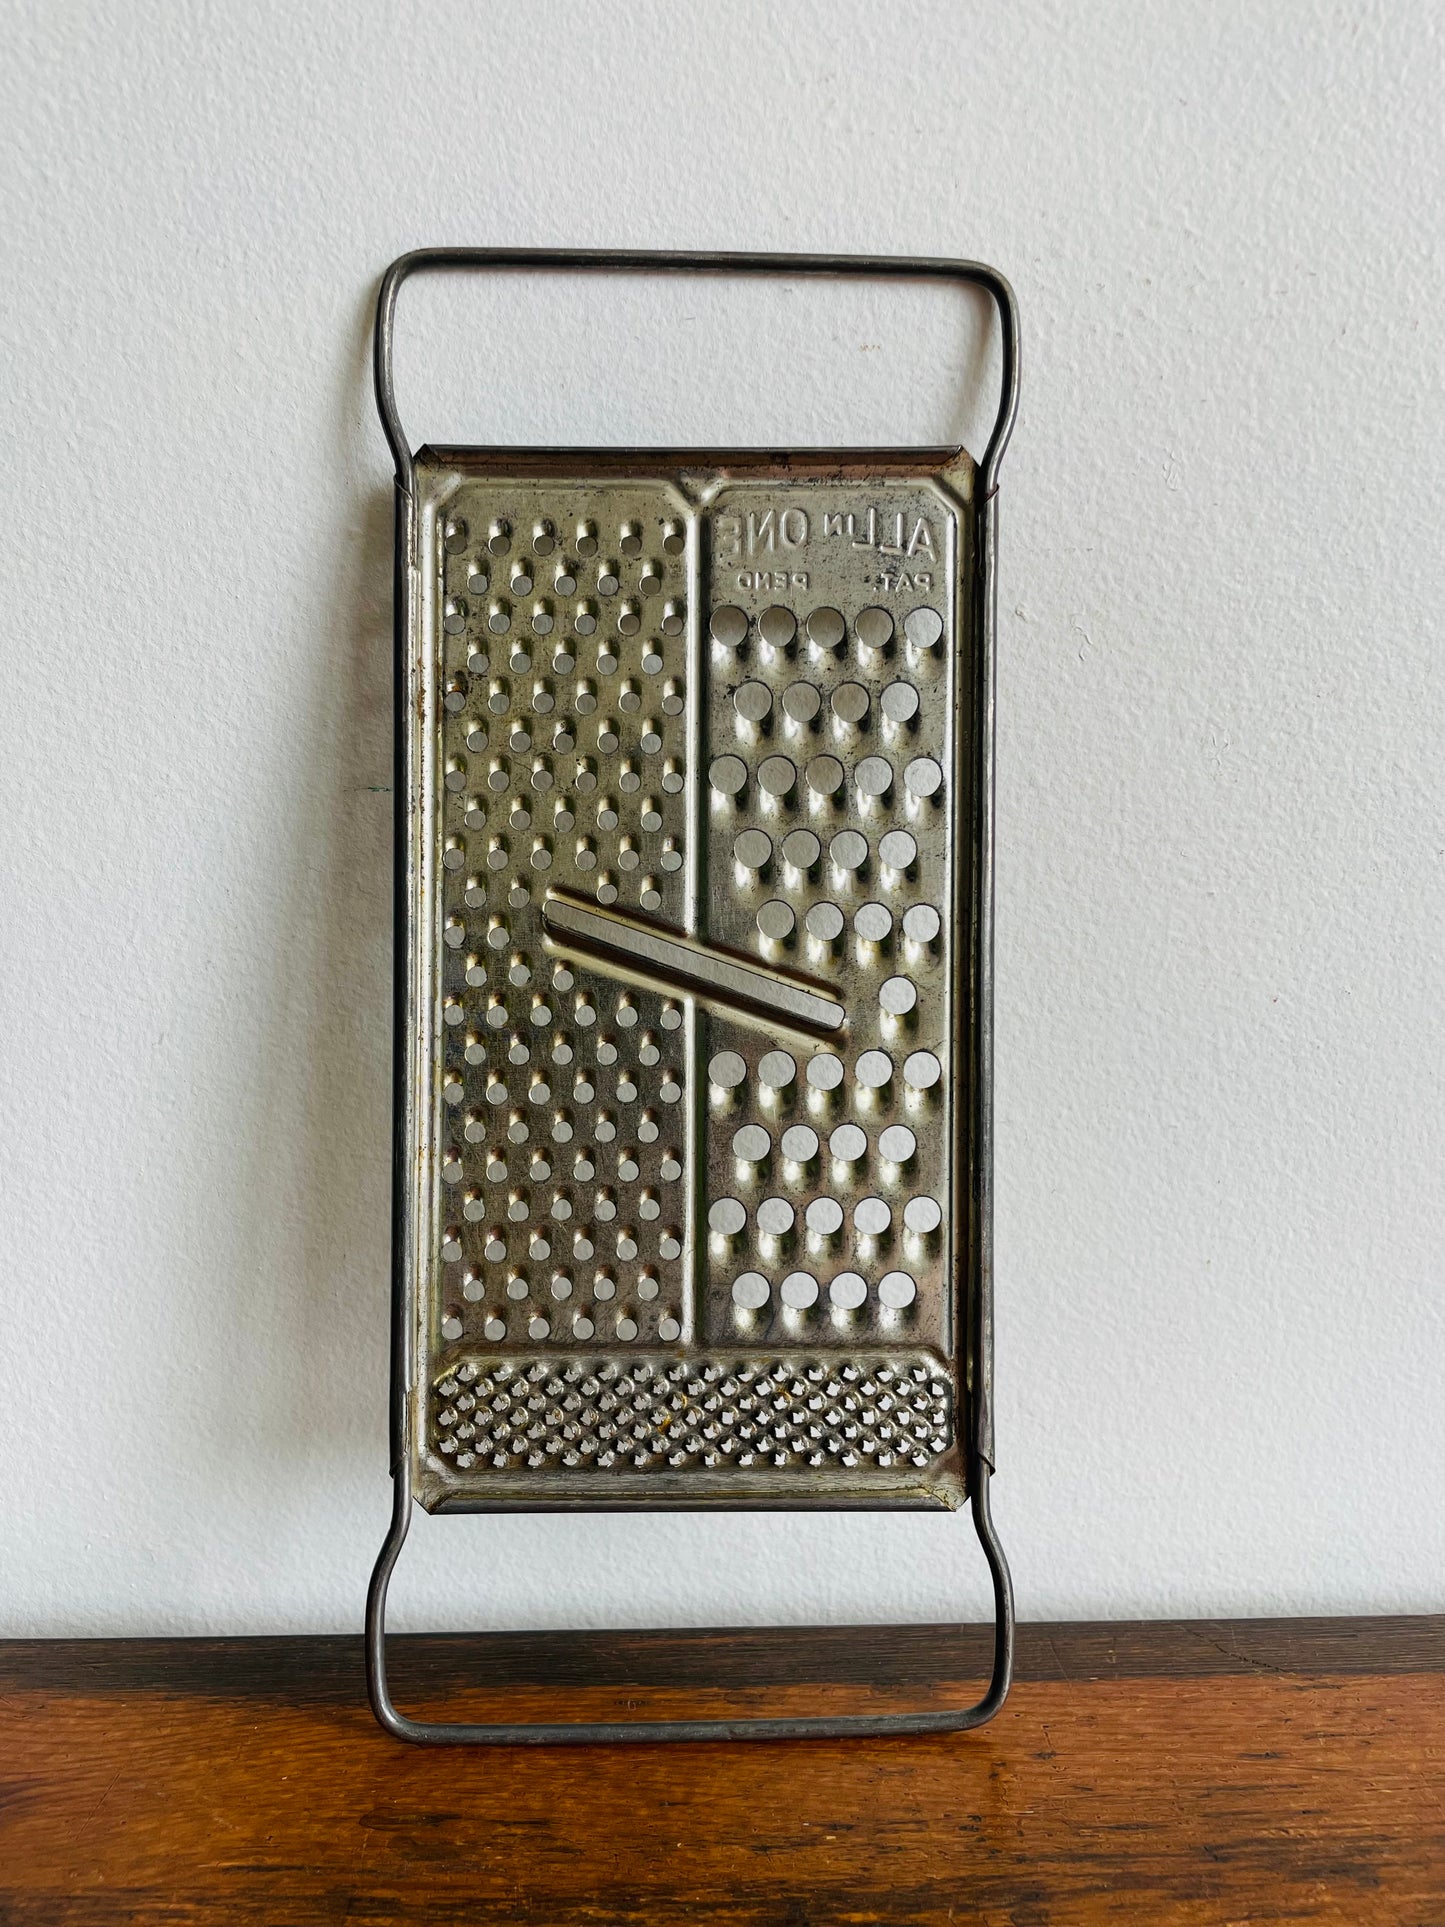 Handheld Metal All In One Grater - Use or Hang as Wall Decor